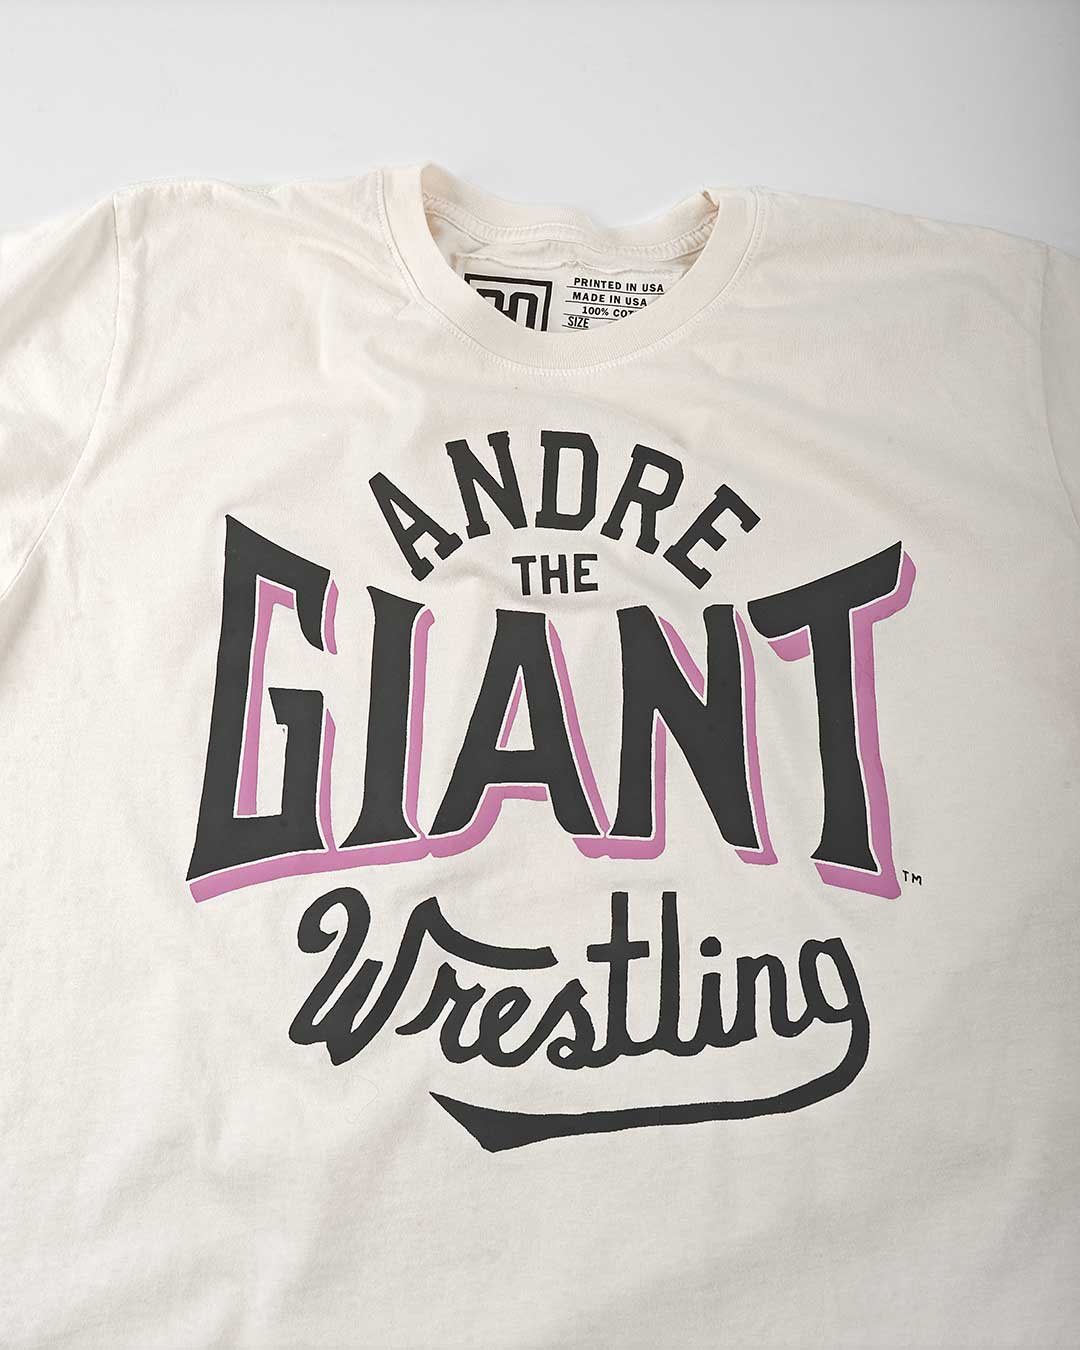 Andre the Giant Wrestling White Tee - Roots of Fight Canada